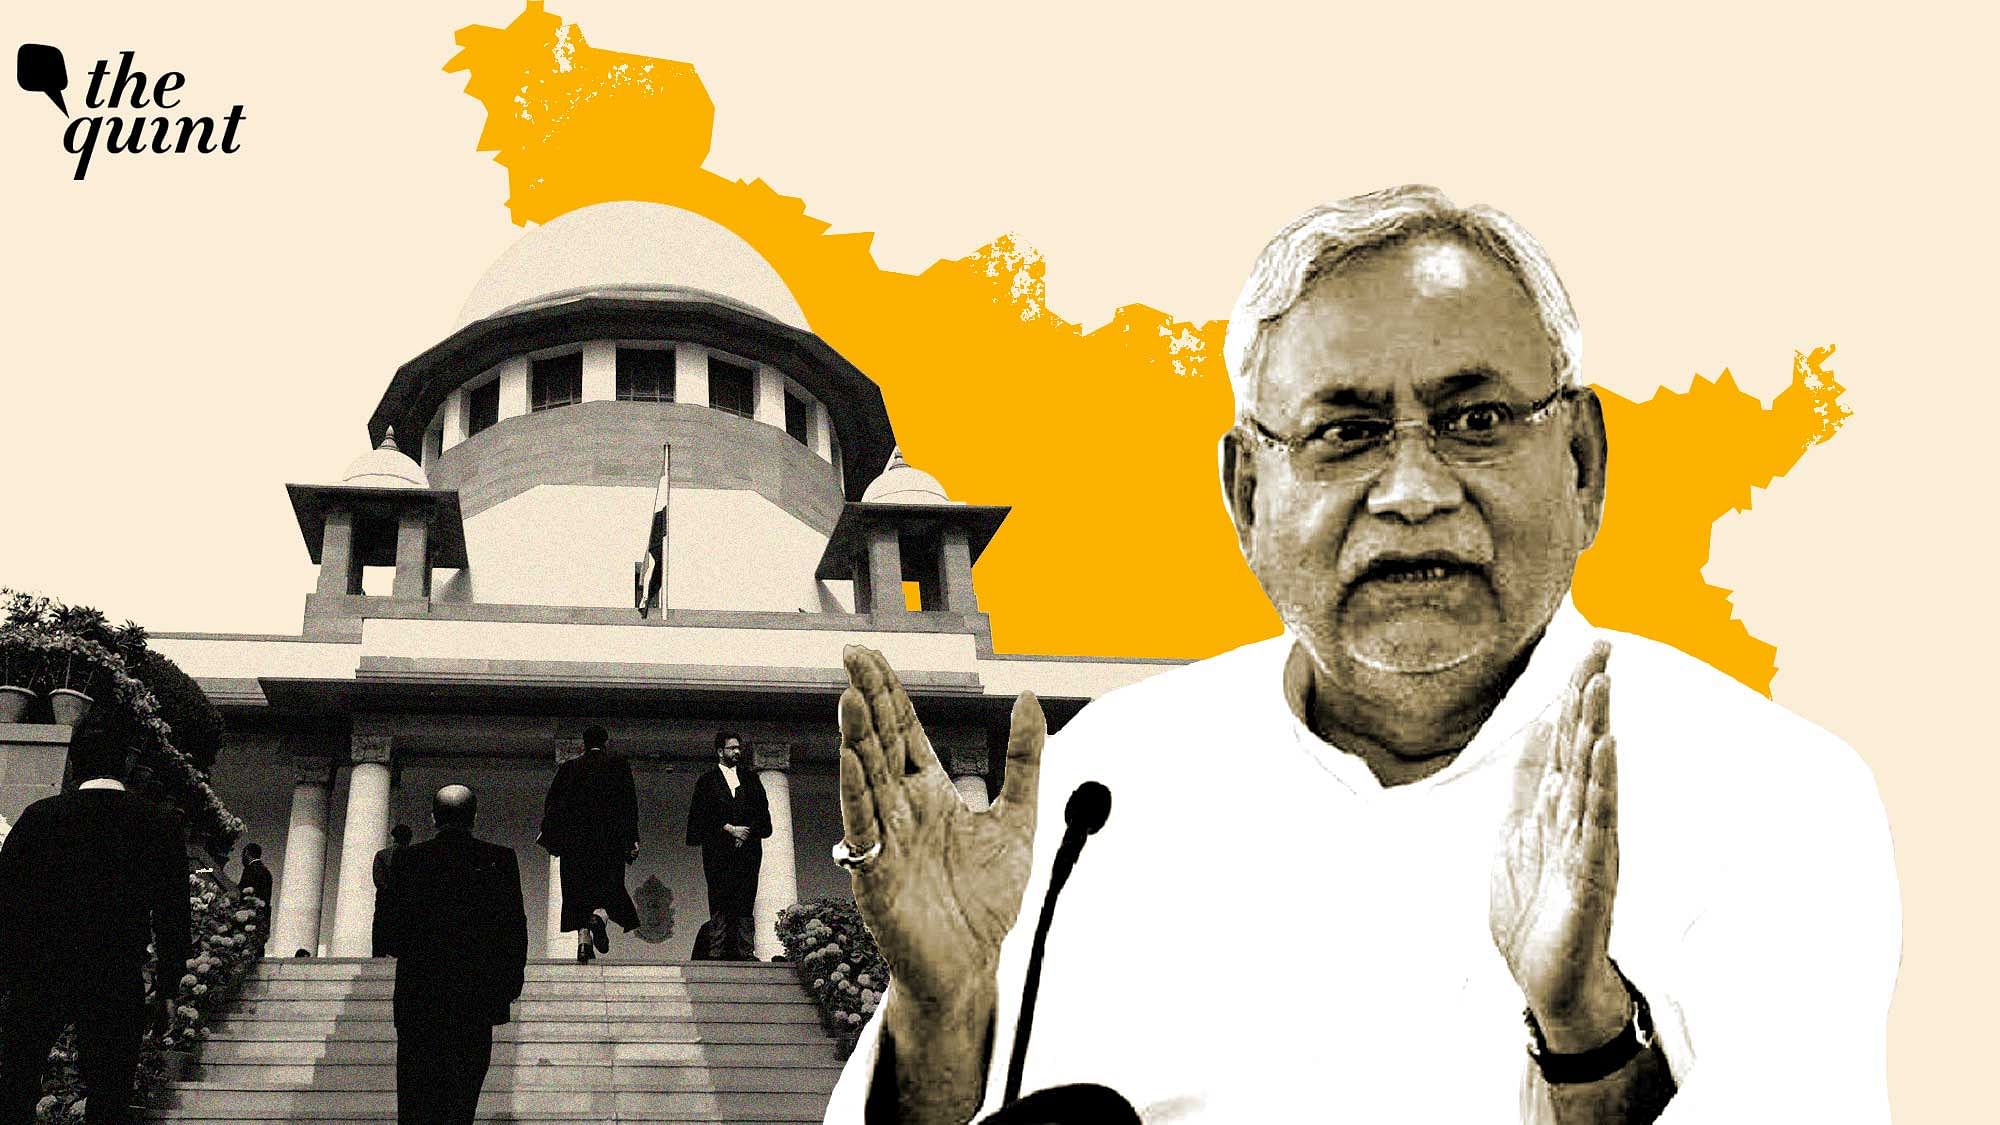 <div class="paragraphs"><p>The implementation of 75 per cent reservations in Bihar is anticipated to encounter legal scrutiny, compelling the government to present evidence to the Court substantiating the presence of extraordinary circumstances warranting the breach of the prescribed ceiling.</p></div>